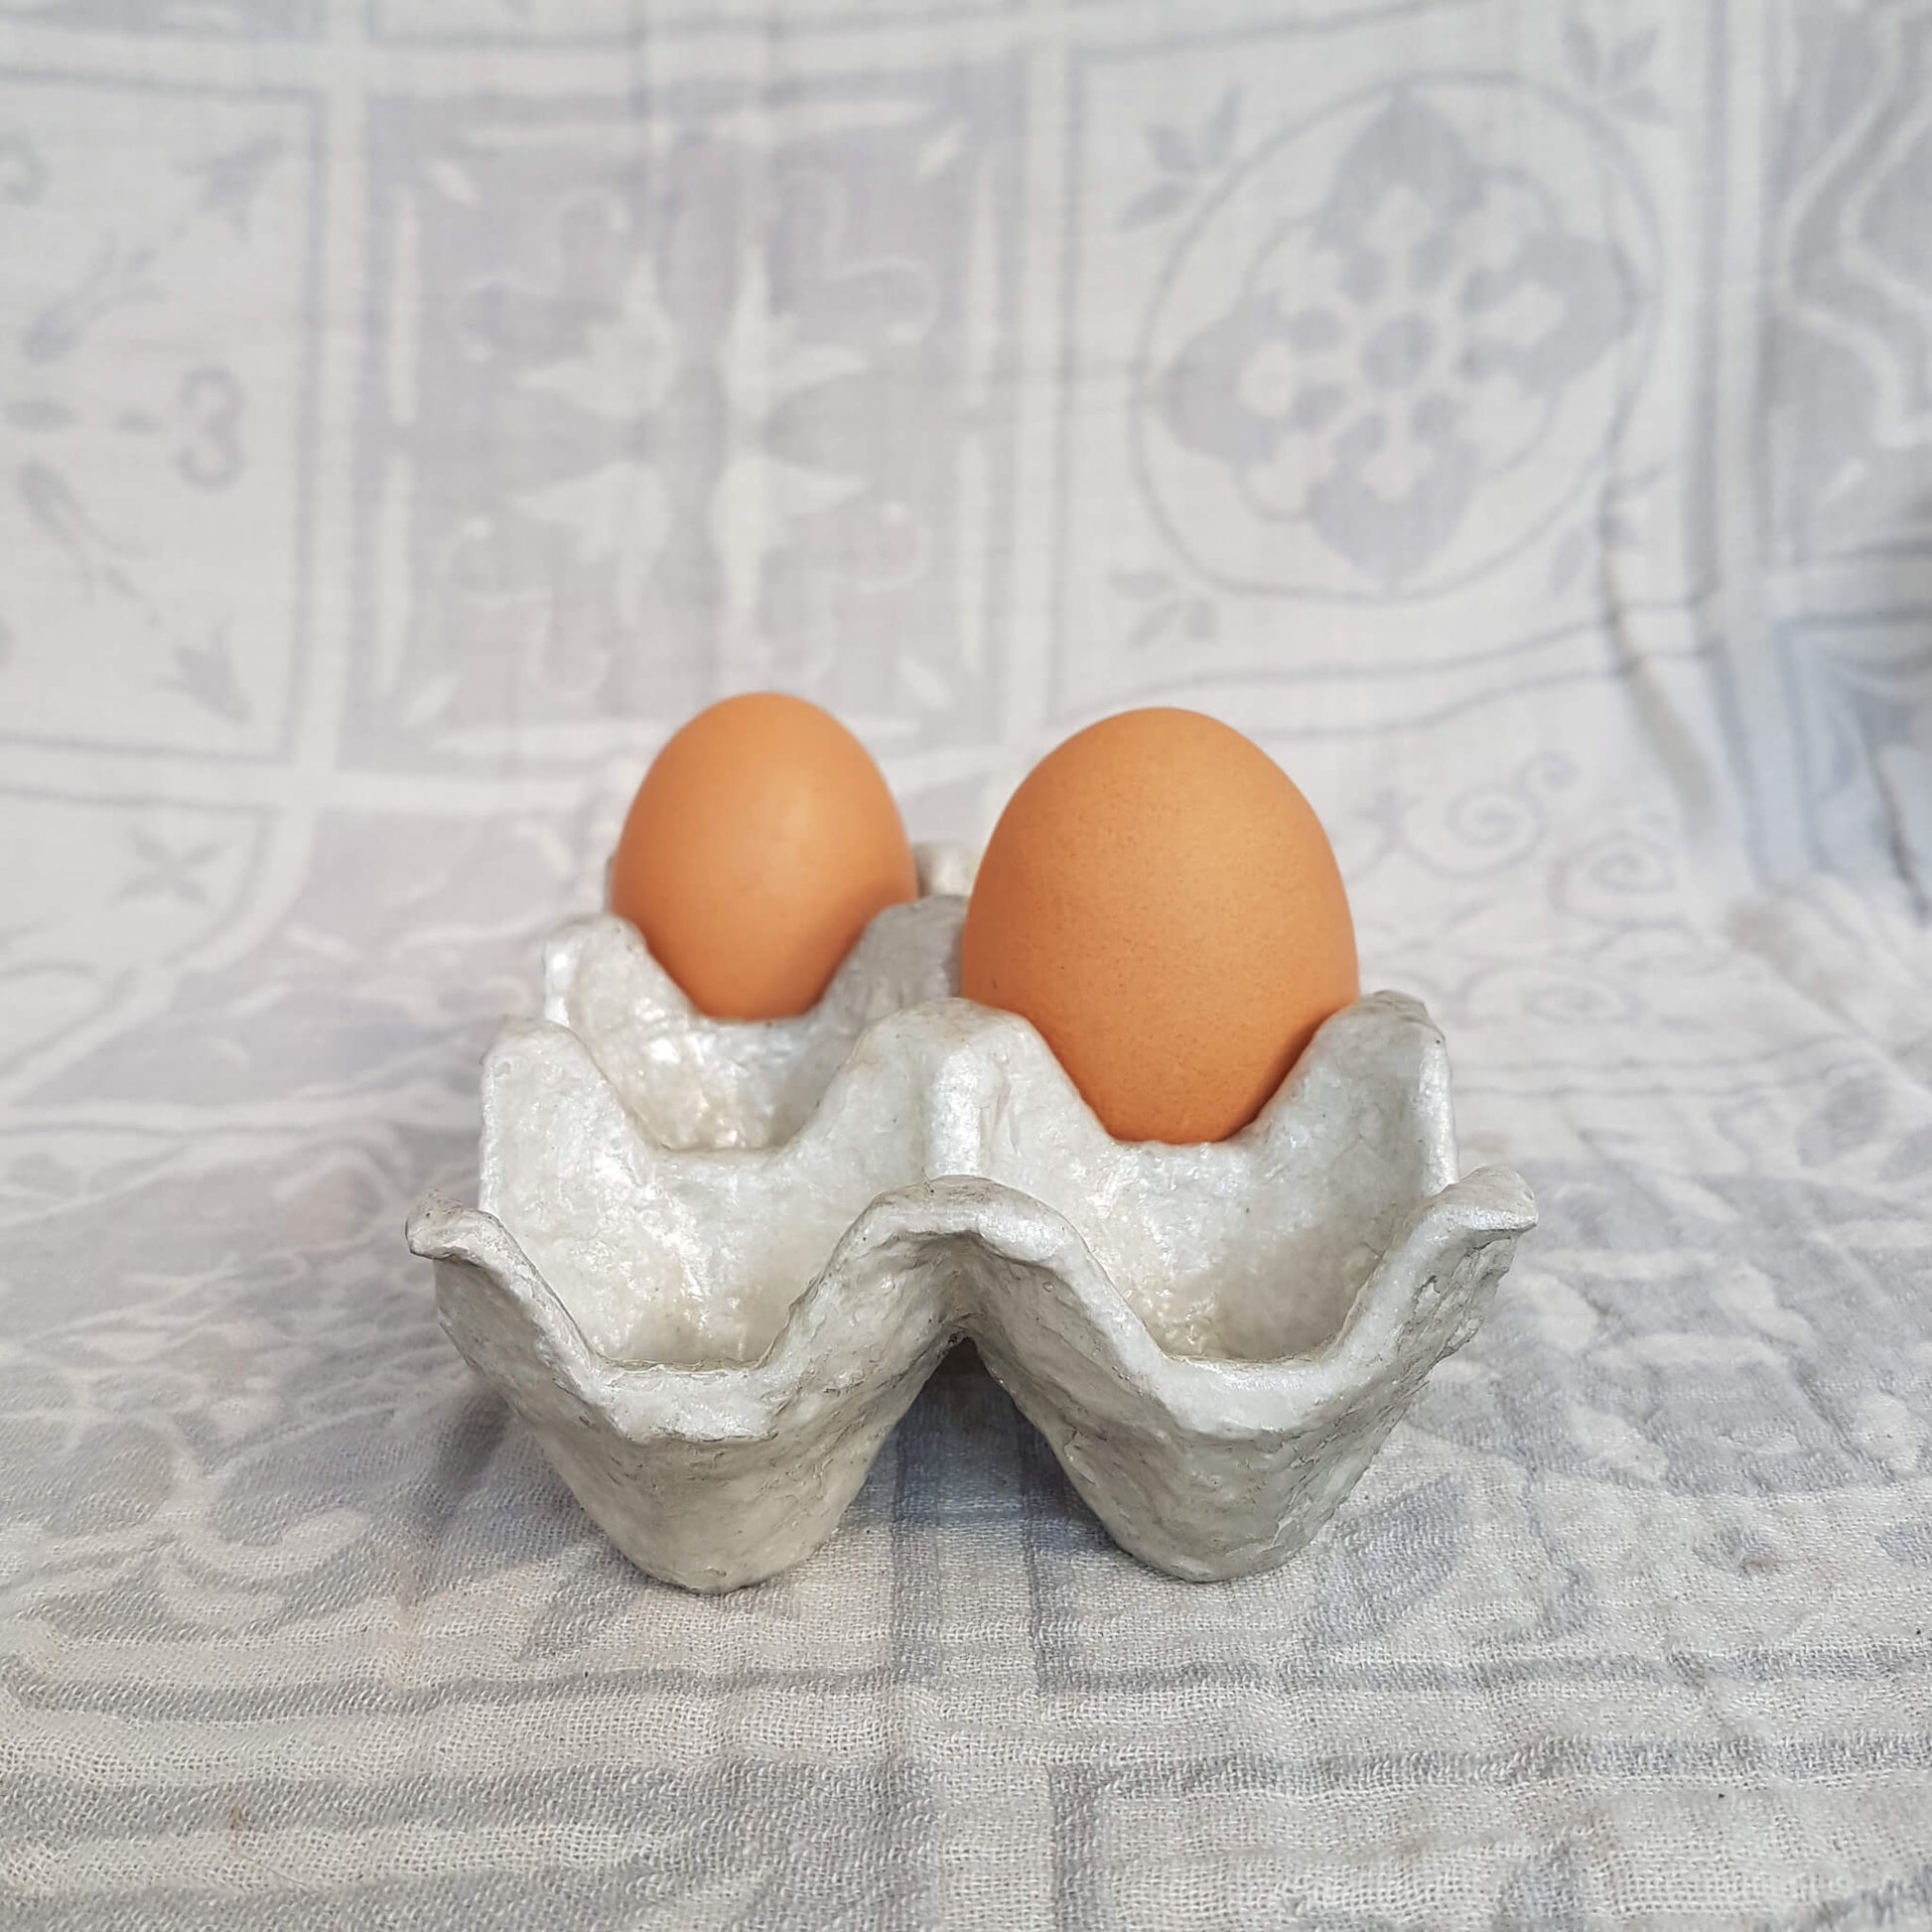 Egg holder - Capiz shell and recycled cardboard - Unik by Nature